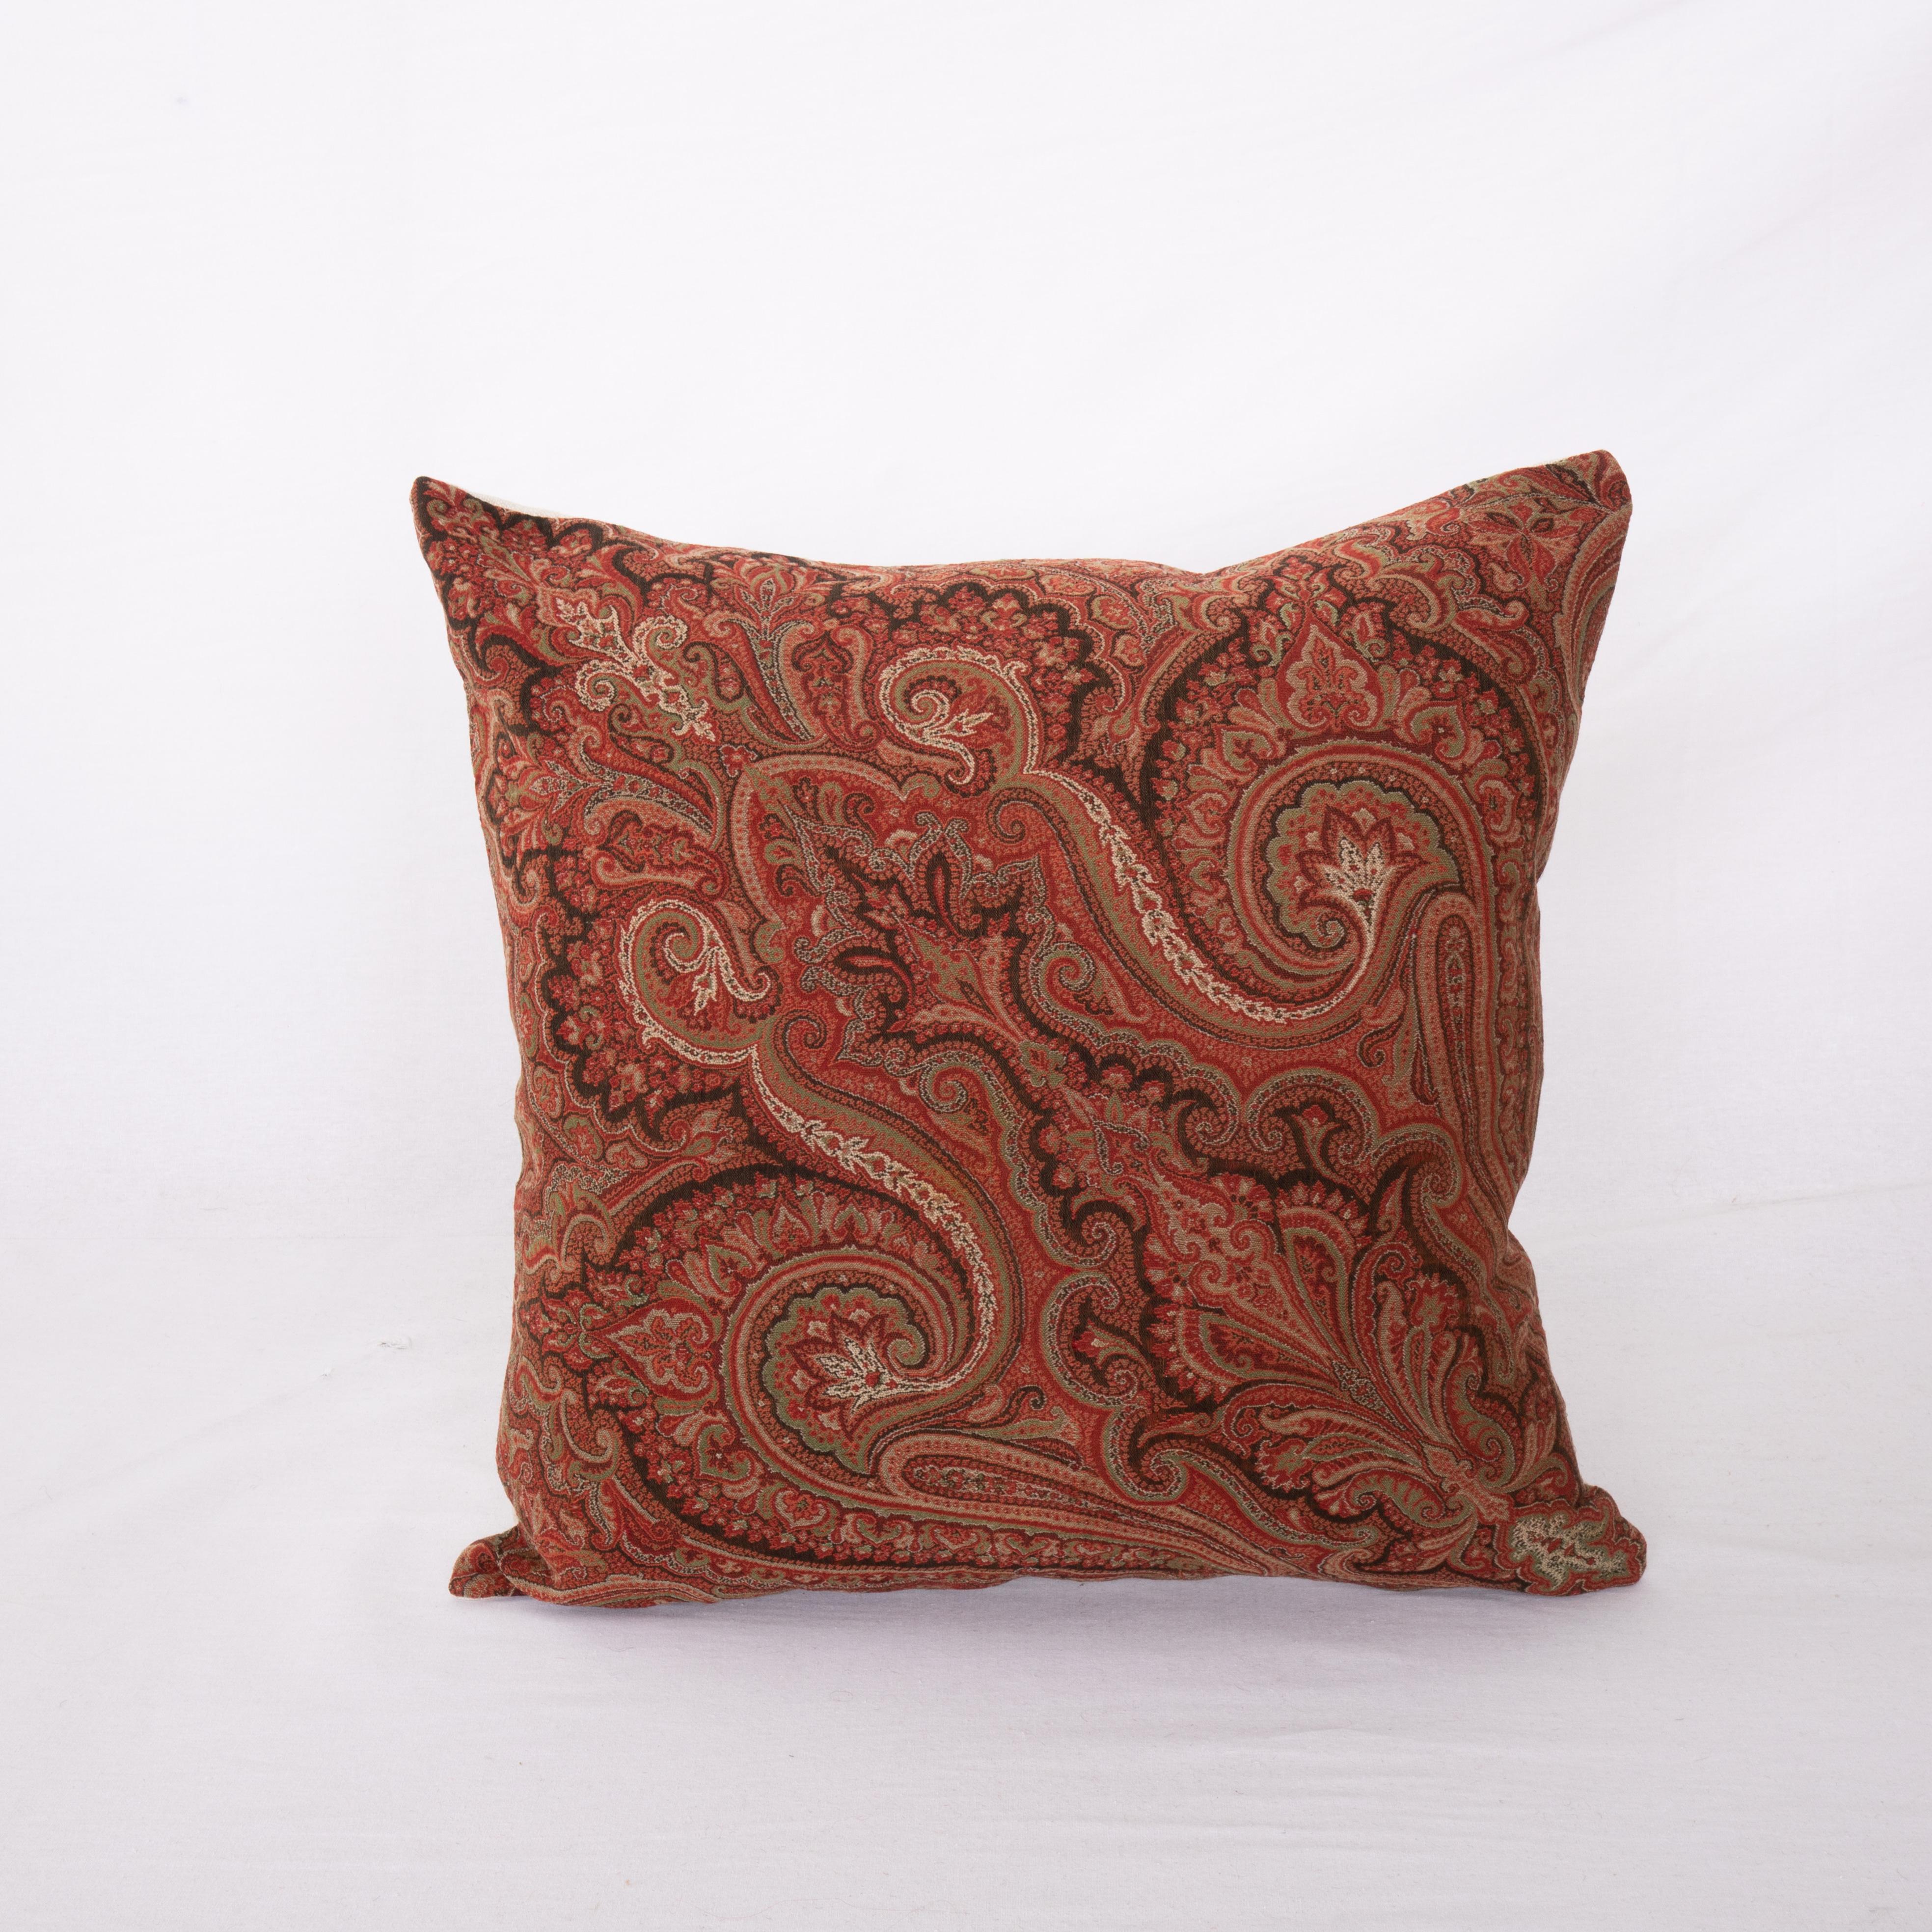 Antique Paisley pillow cover made from a European wool Paisley shawl, late 19th /early 20th century
It does not come with an insert.
Linen in the back.
Zipper closure.
Dry. Cleaning is reccommeded.

Antique European Paisley shawls are a type